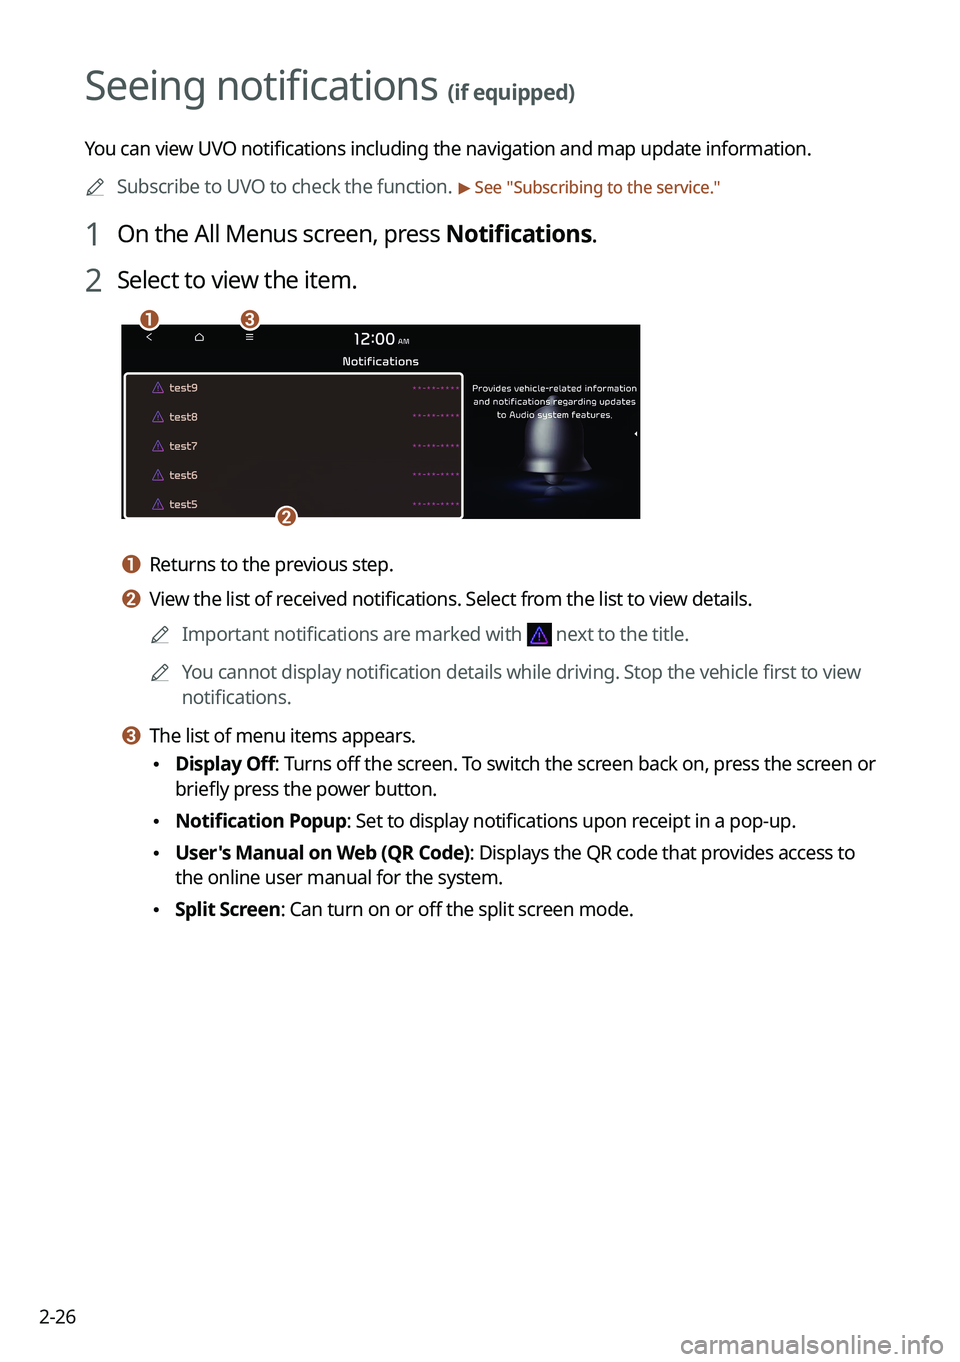 KIA FORTE 2022  Navigation System Quick Reference Guide 2-26
Seeing notifications (if equipped)
You can view UVO notifications including the navigation and map update information.0000
A
Subscribe to UVO to check the function. 
> See "Subscribing to the